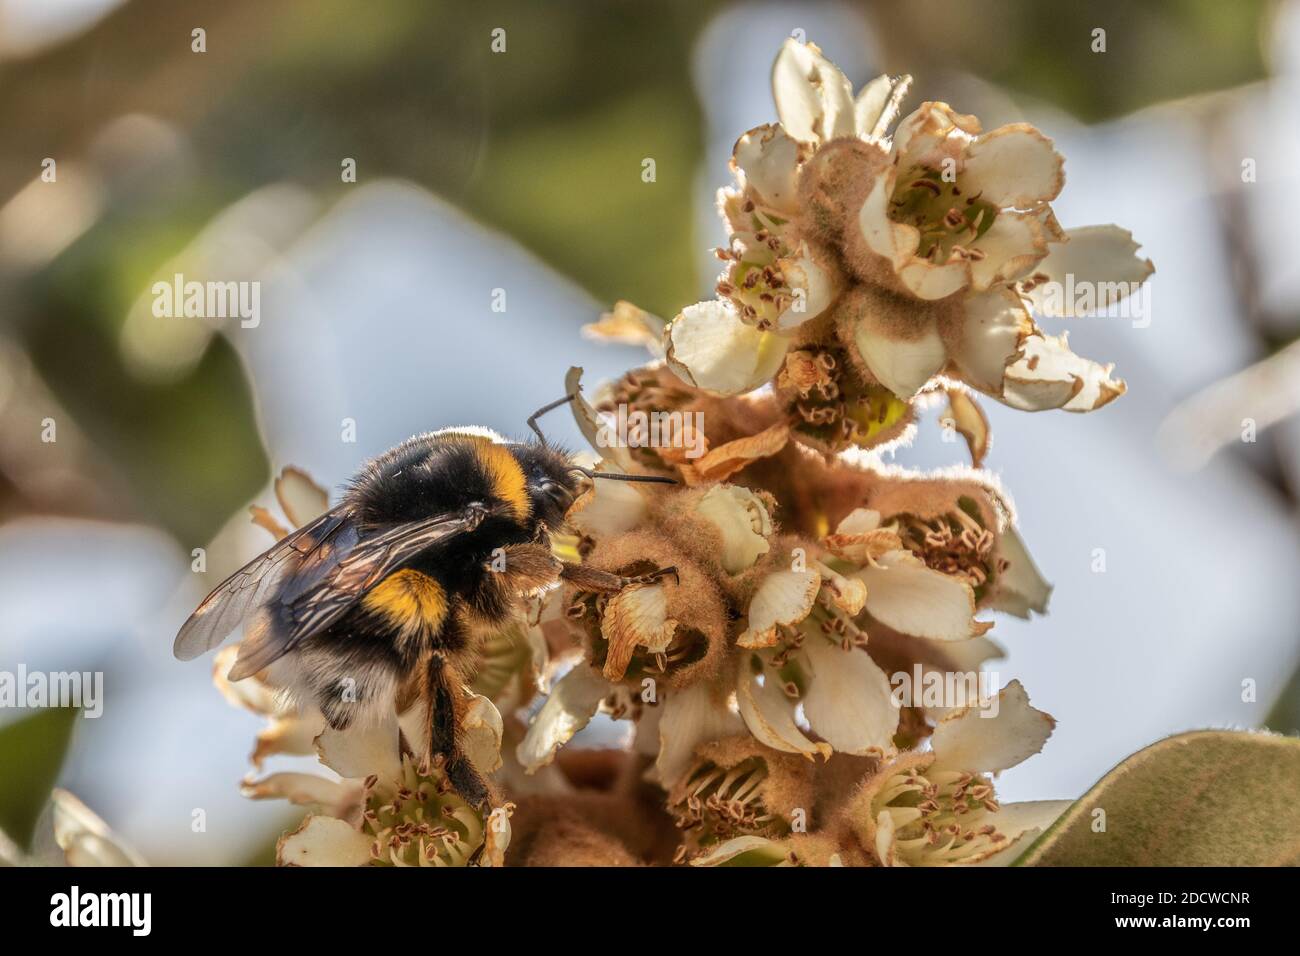 Bombus terrestris, Buff tailed bumblebee on the Flower of a Eriobotrya japonica tree Stock Photo